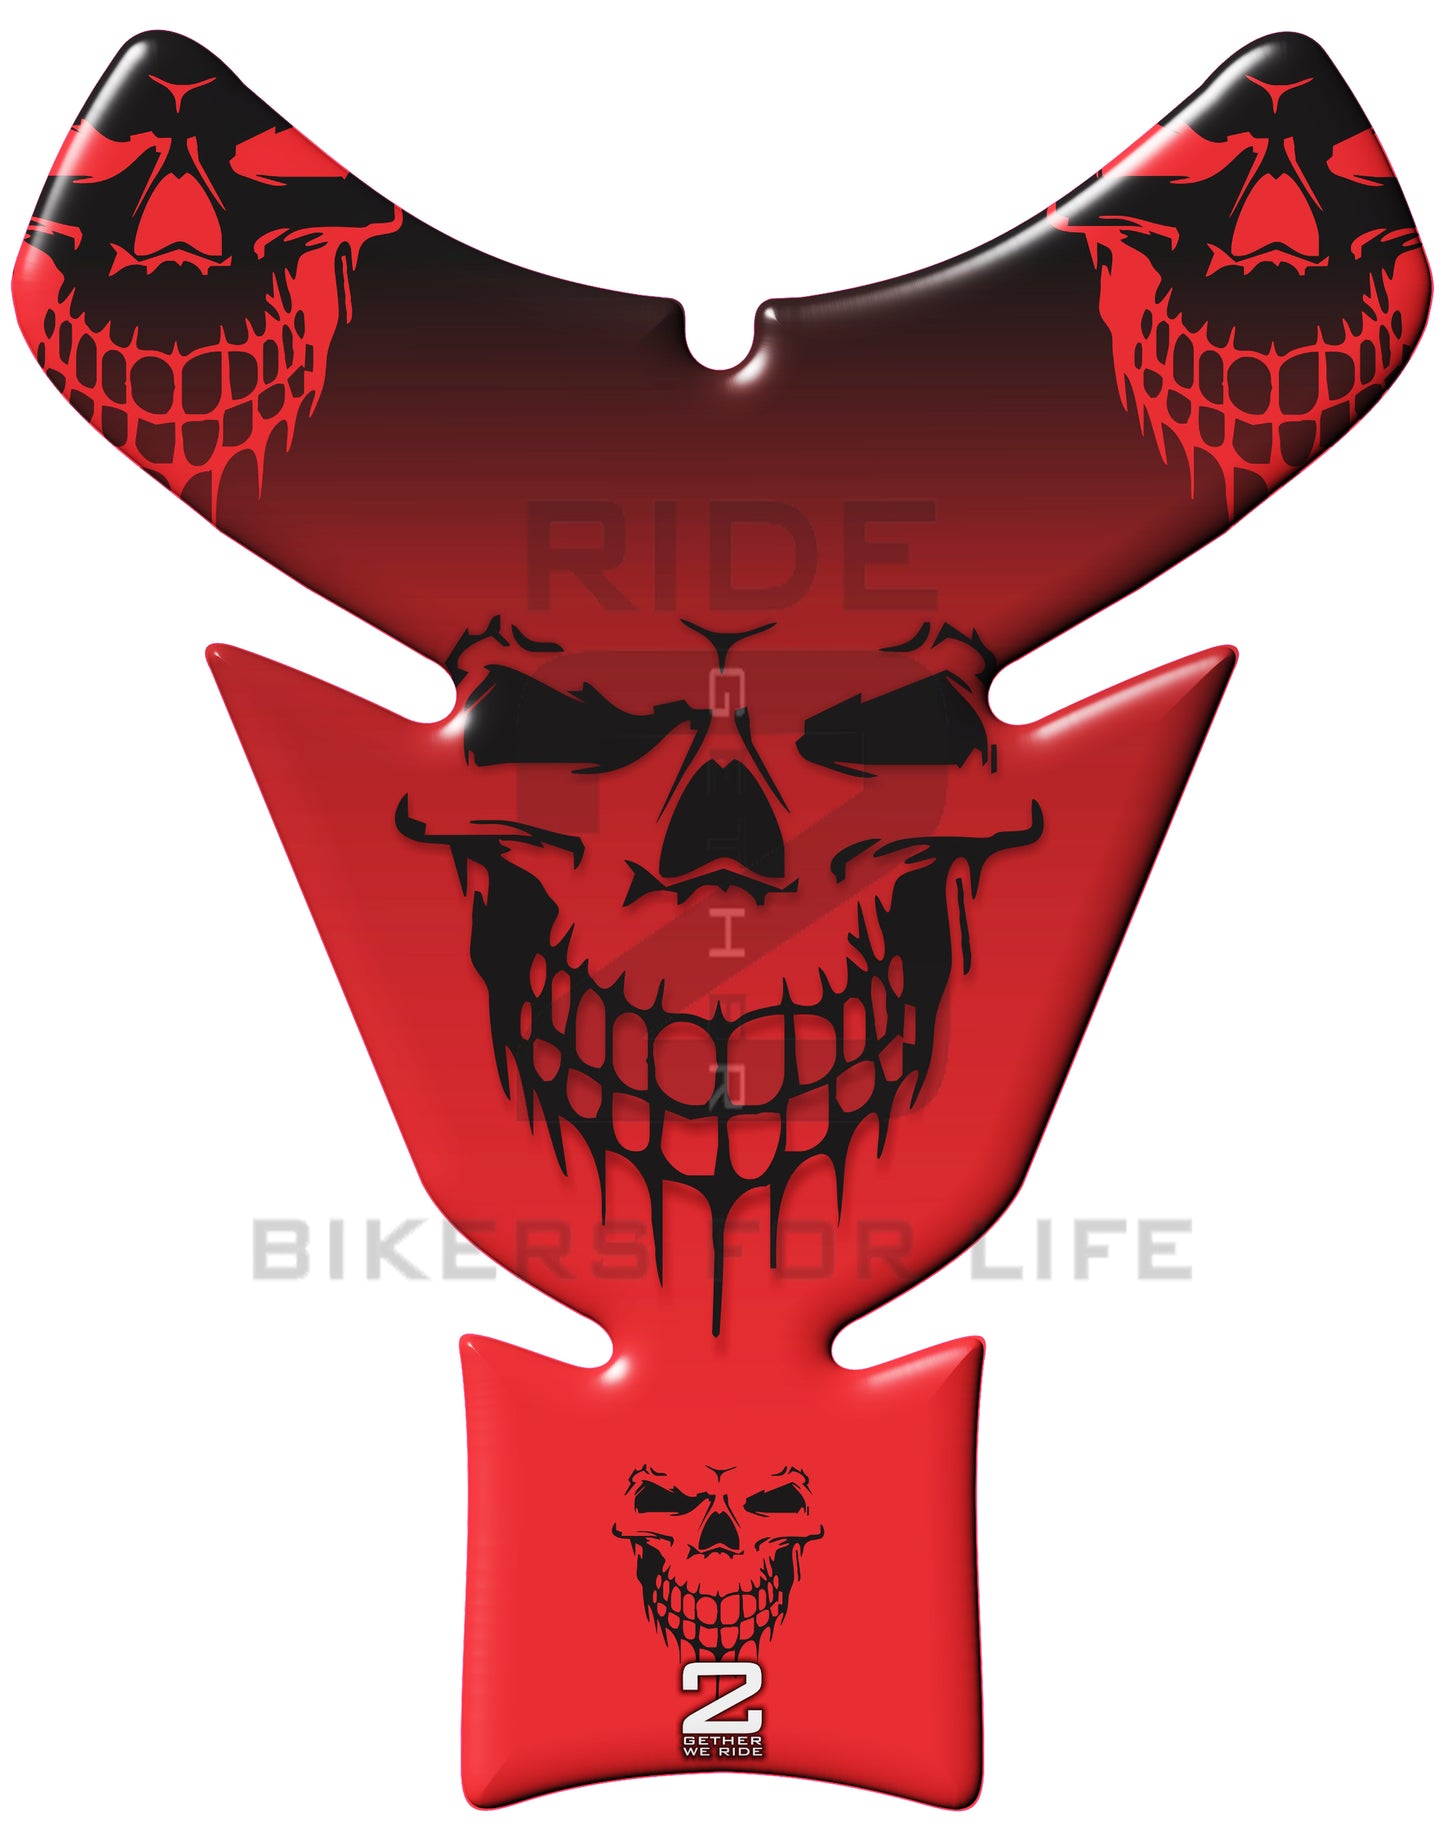 Universal Fit Black and Red Smiling Reaper Motor Bike Tank Pad Protector. A Street Pad which fits most motorcycles.